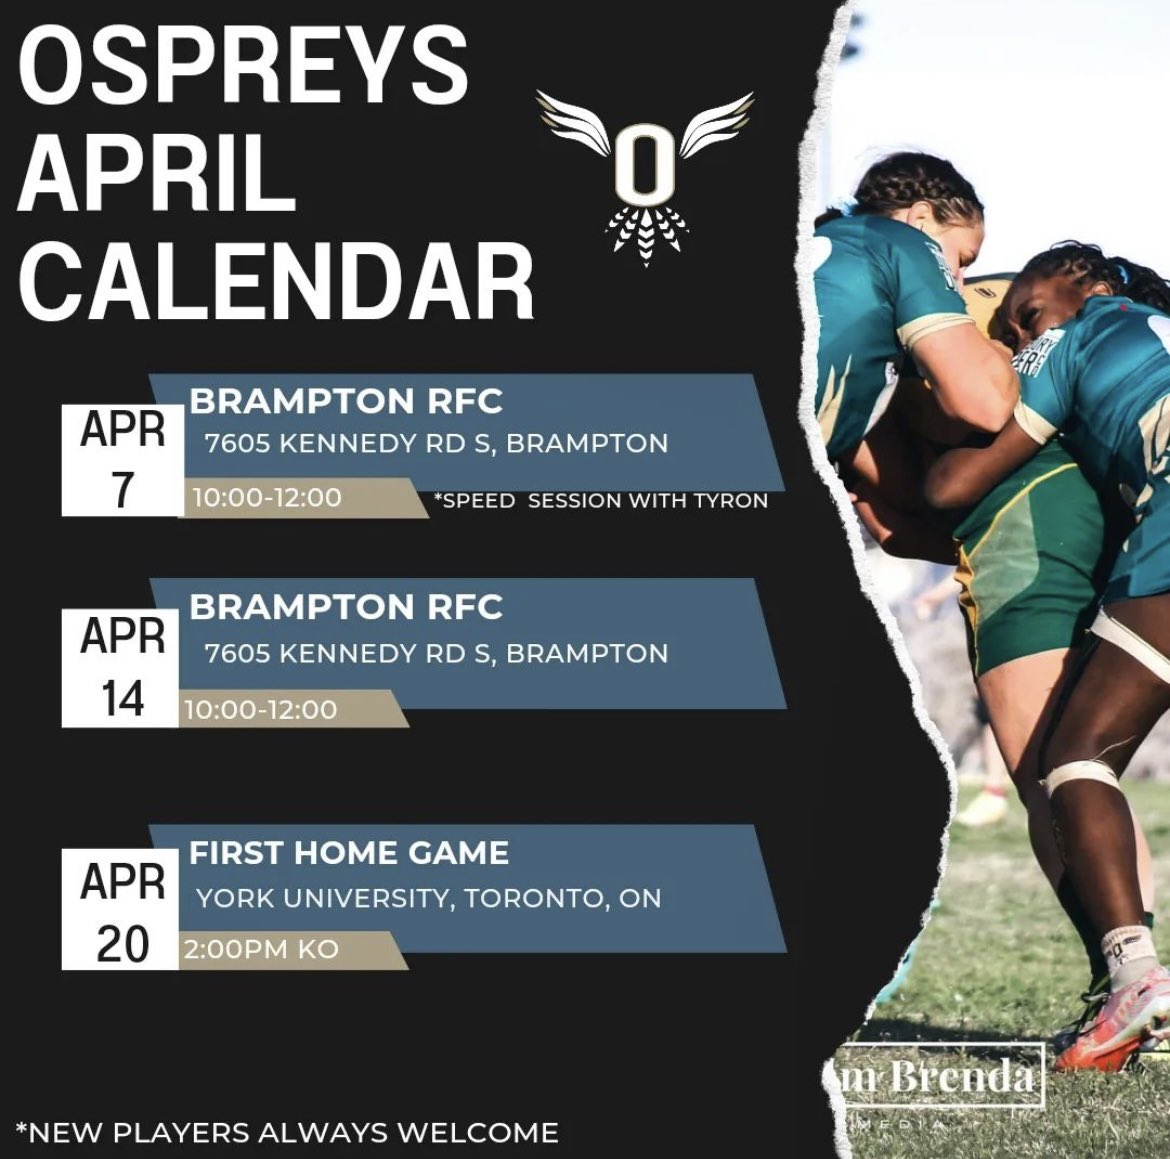 Ontario Ospreys April schedule includes two practices and their first home game of the season on April 20 at York University! Time to get in on women’s #rugbyleague! Come play or watch. New members always welcome.